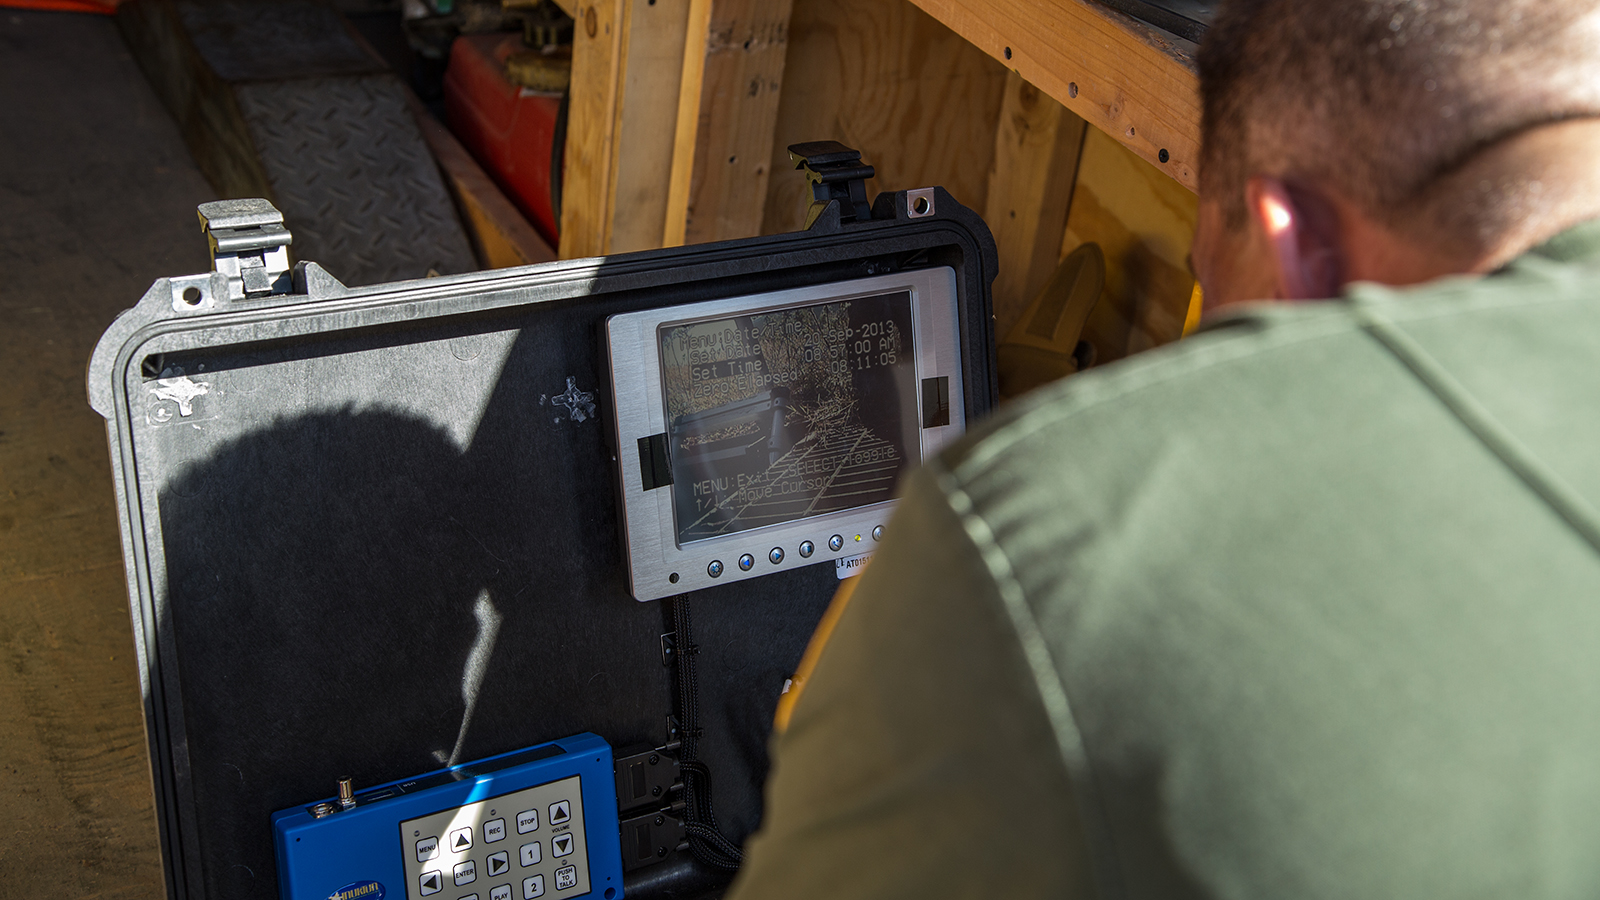 Supervisory Border Patrol Agent Kevin Hecht monitors the information relayed to a console by the robot as it explores the tunnel.